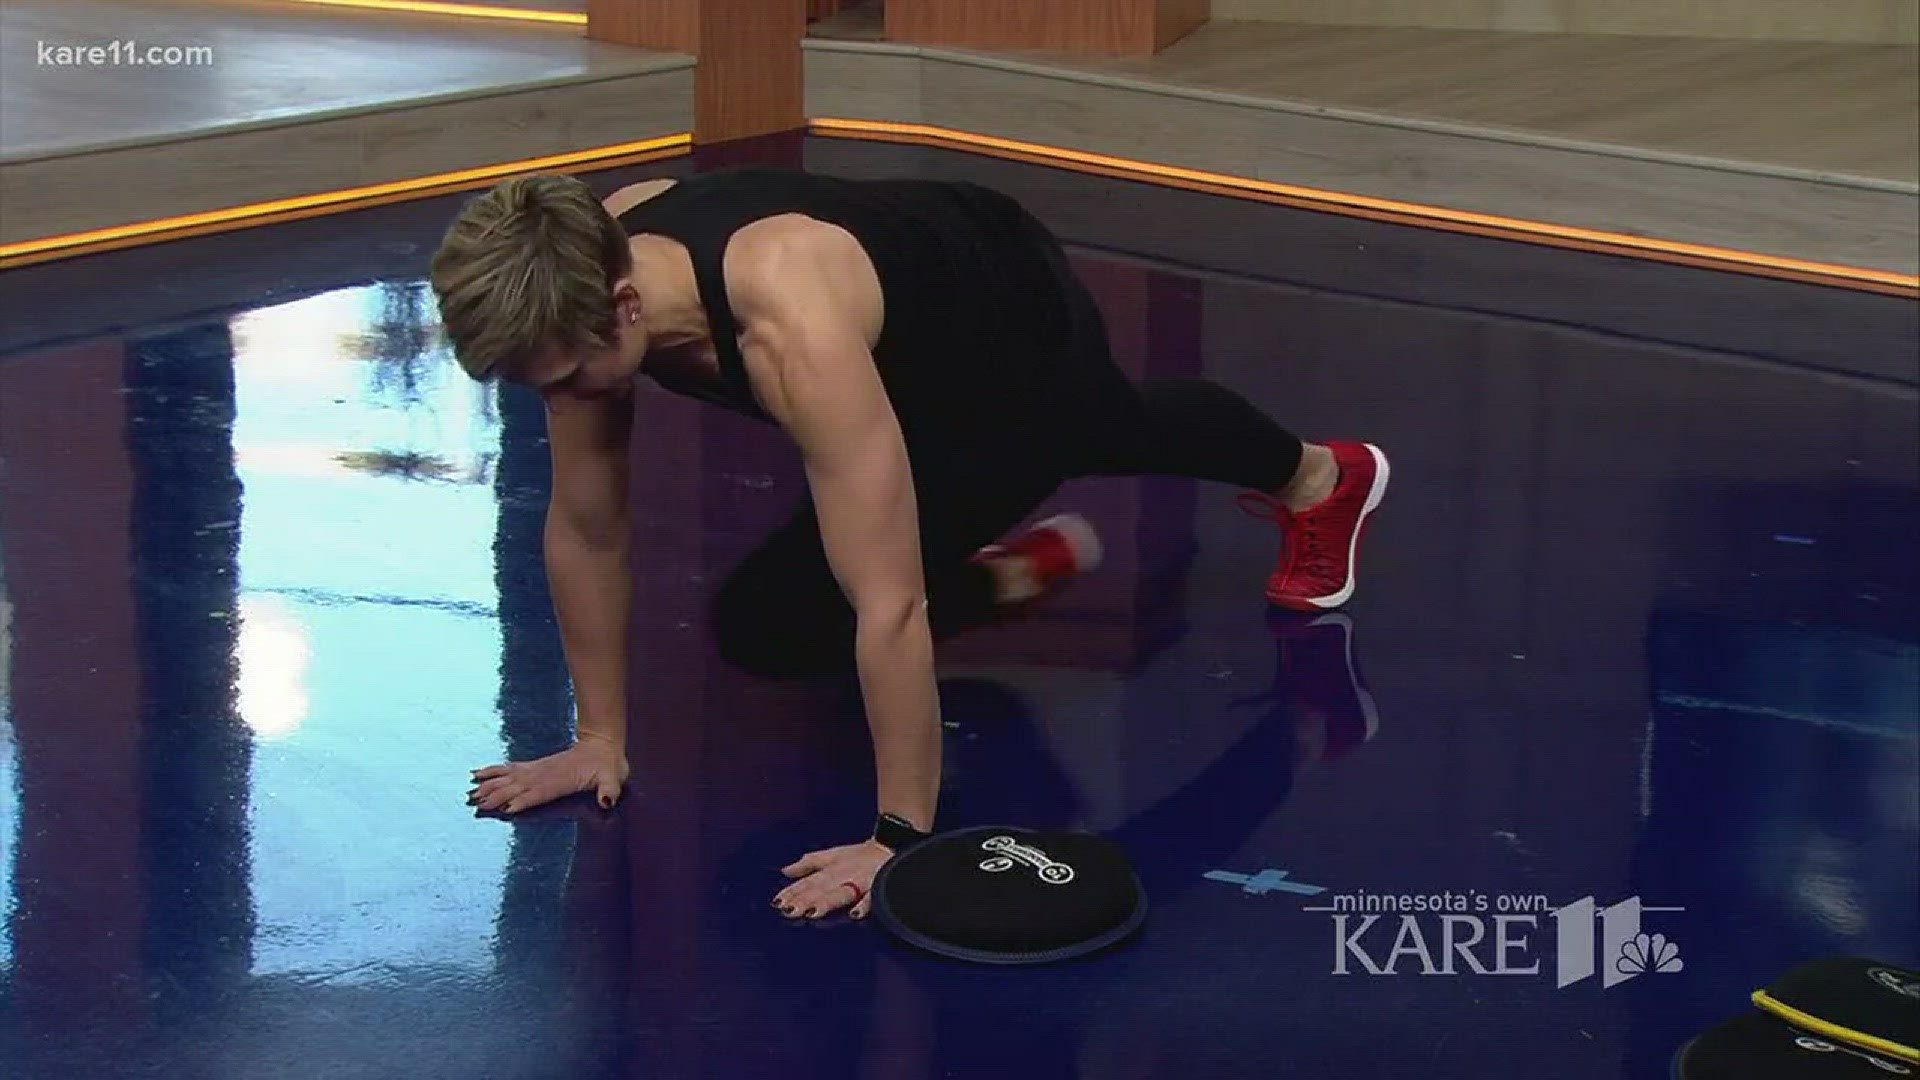 Life Time's Jessica Jordani and Bethany Feldman appeared on KARE 11 to talk about "Spartan Strong," one of the most unique classes the fitness center offers. Participants will discover their inner Spartan with this intense group fitness class. http://kare